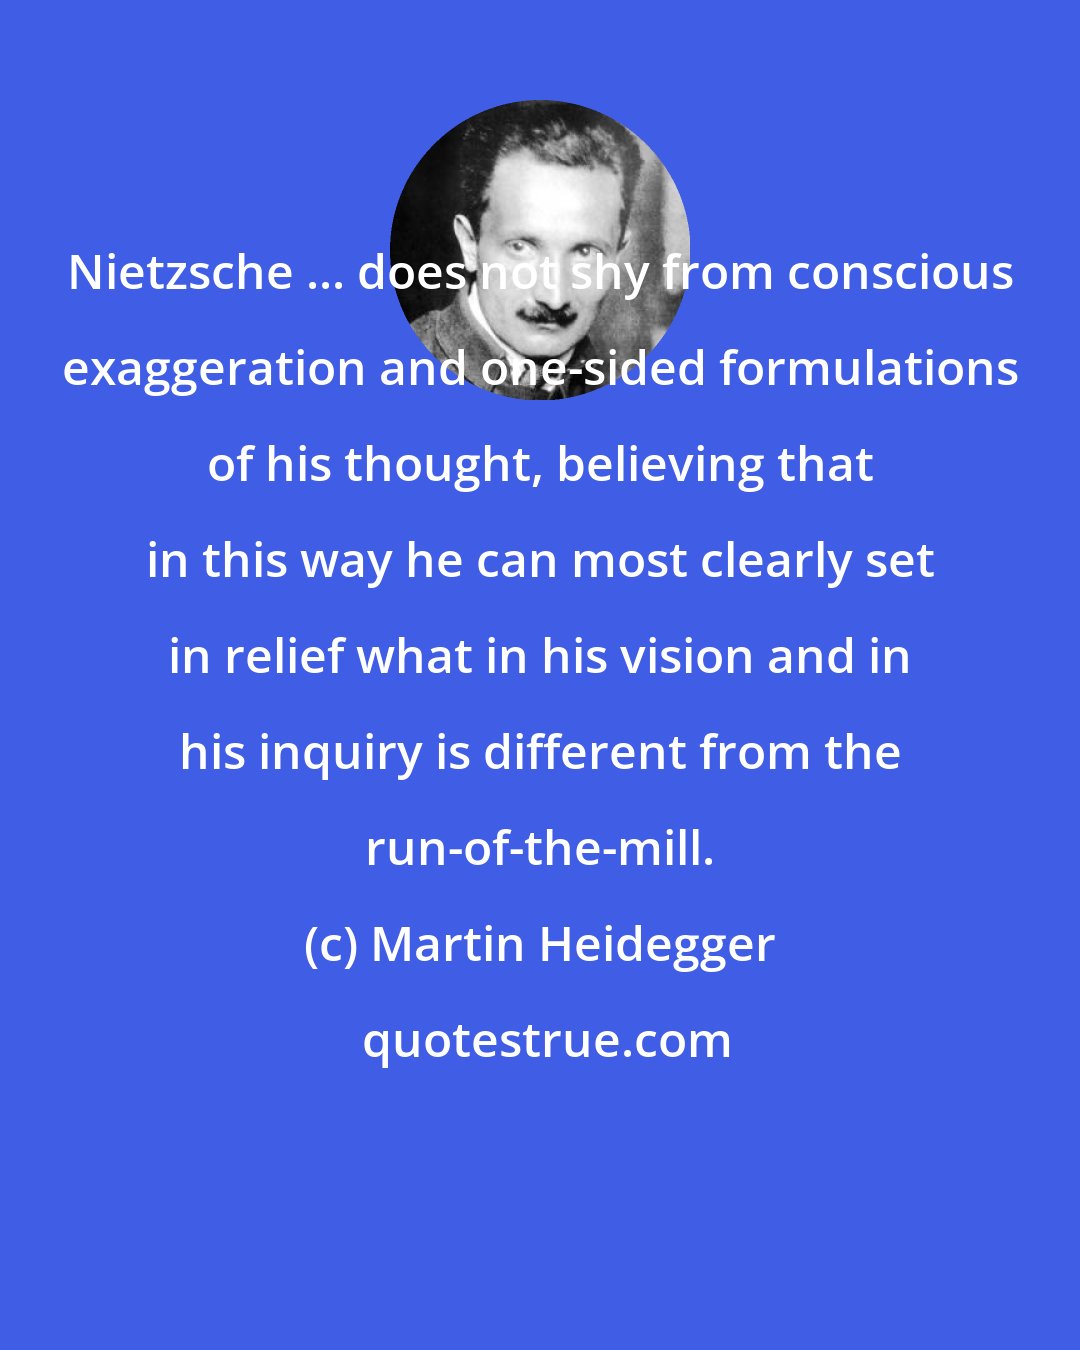 Martin Heidegger: Nietzsche ... does not shy from conscious exaggeration and one-sided formulations of his thought, believing that in this way he can most clearly set in relief what in his vision and in his inquiry is different from the run-of-the-mill.